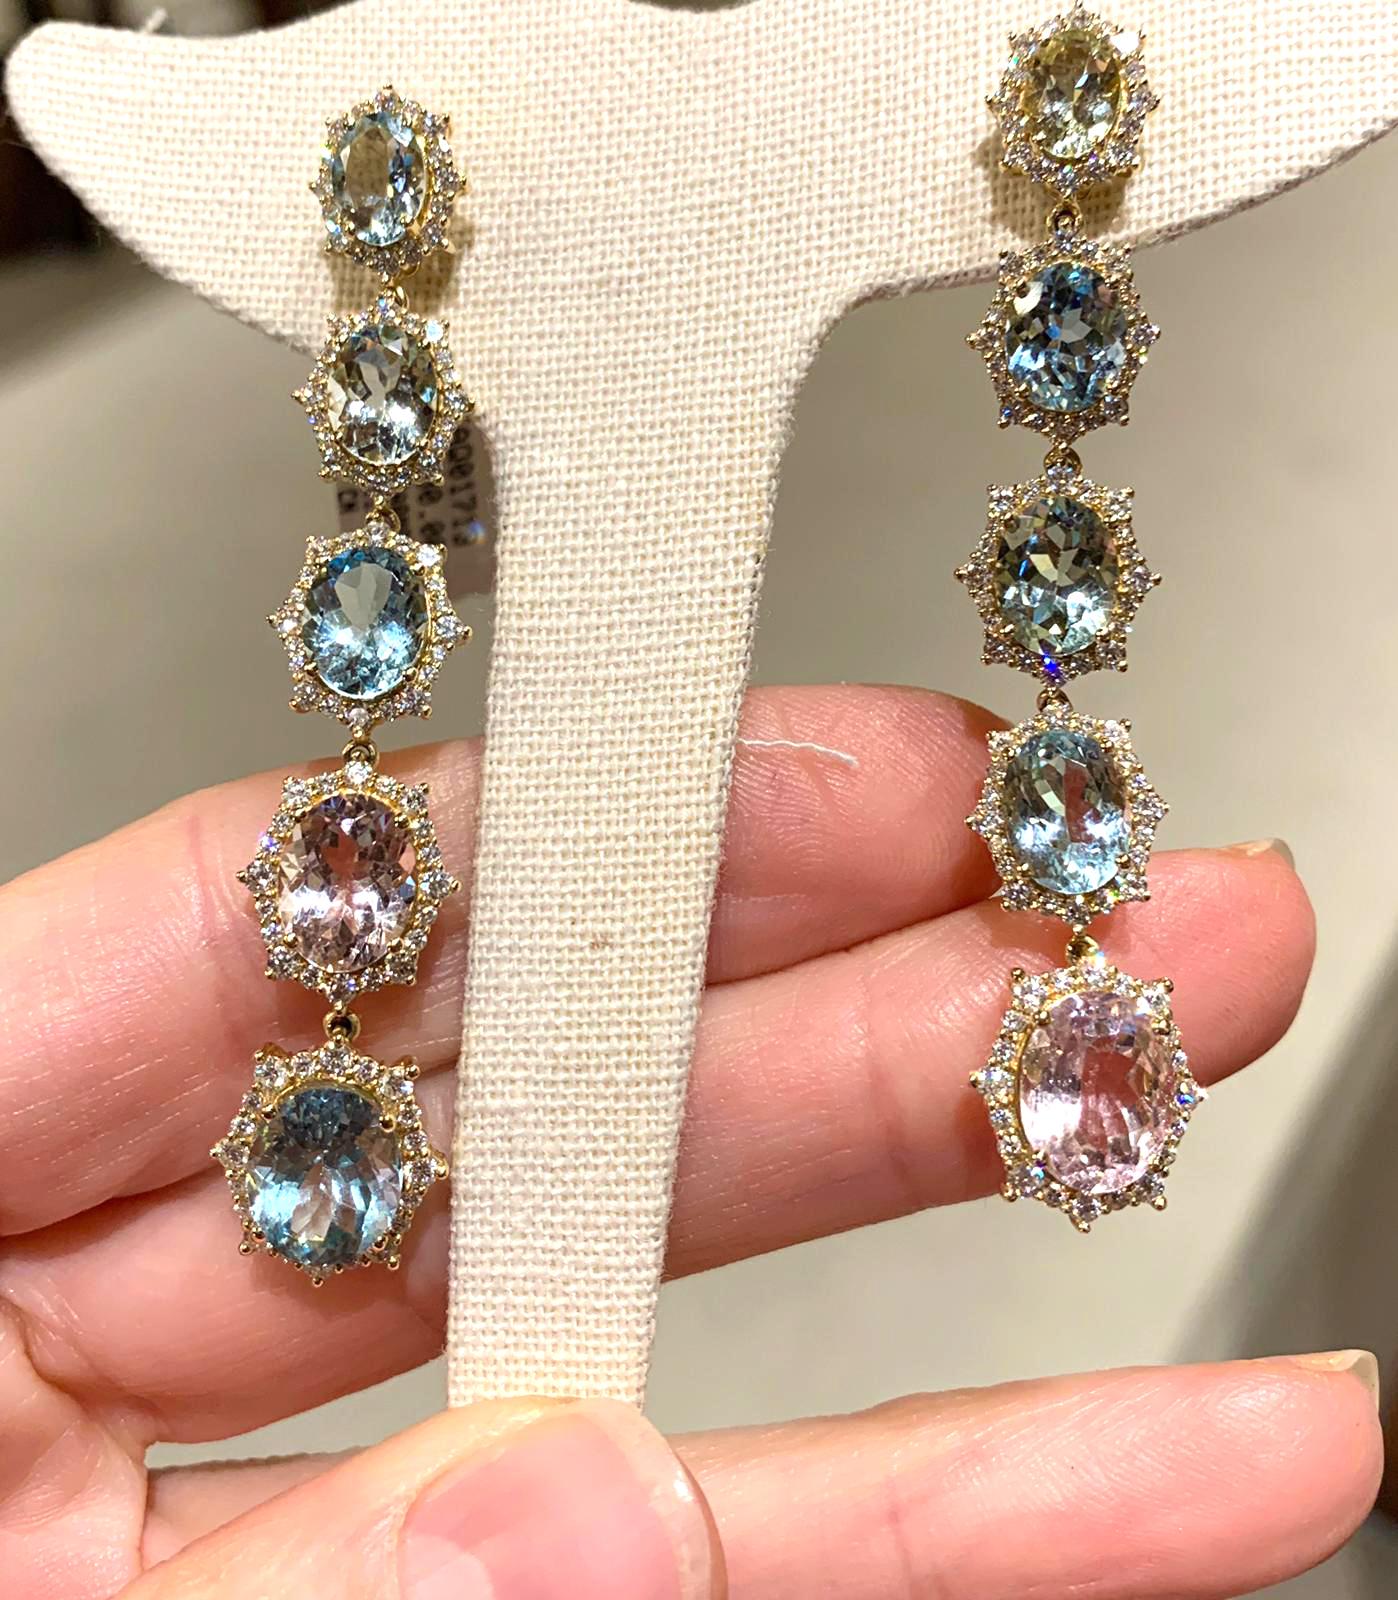 Beryl 5 Oval Long Earrings with Diamonds, from 'G-One' Collection

Diamonds: G-H / VS, Approx. Wt: 2.22 Carats 